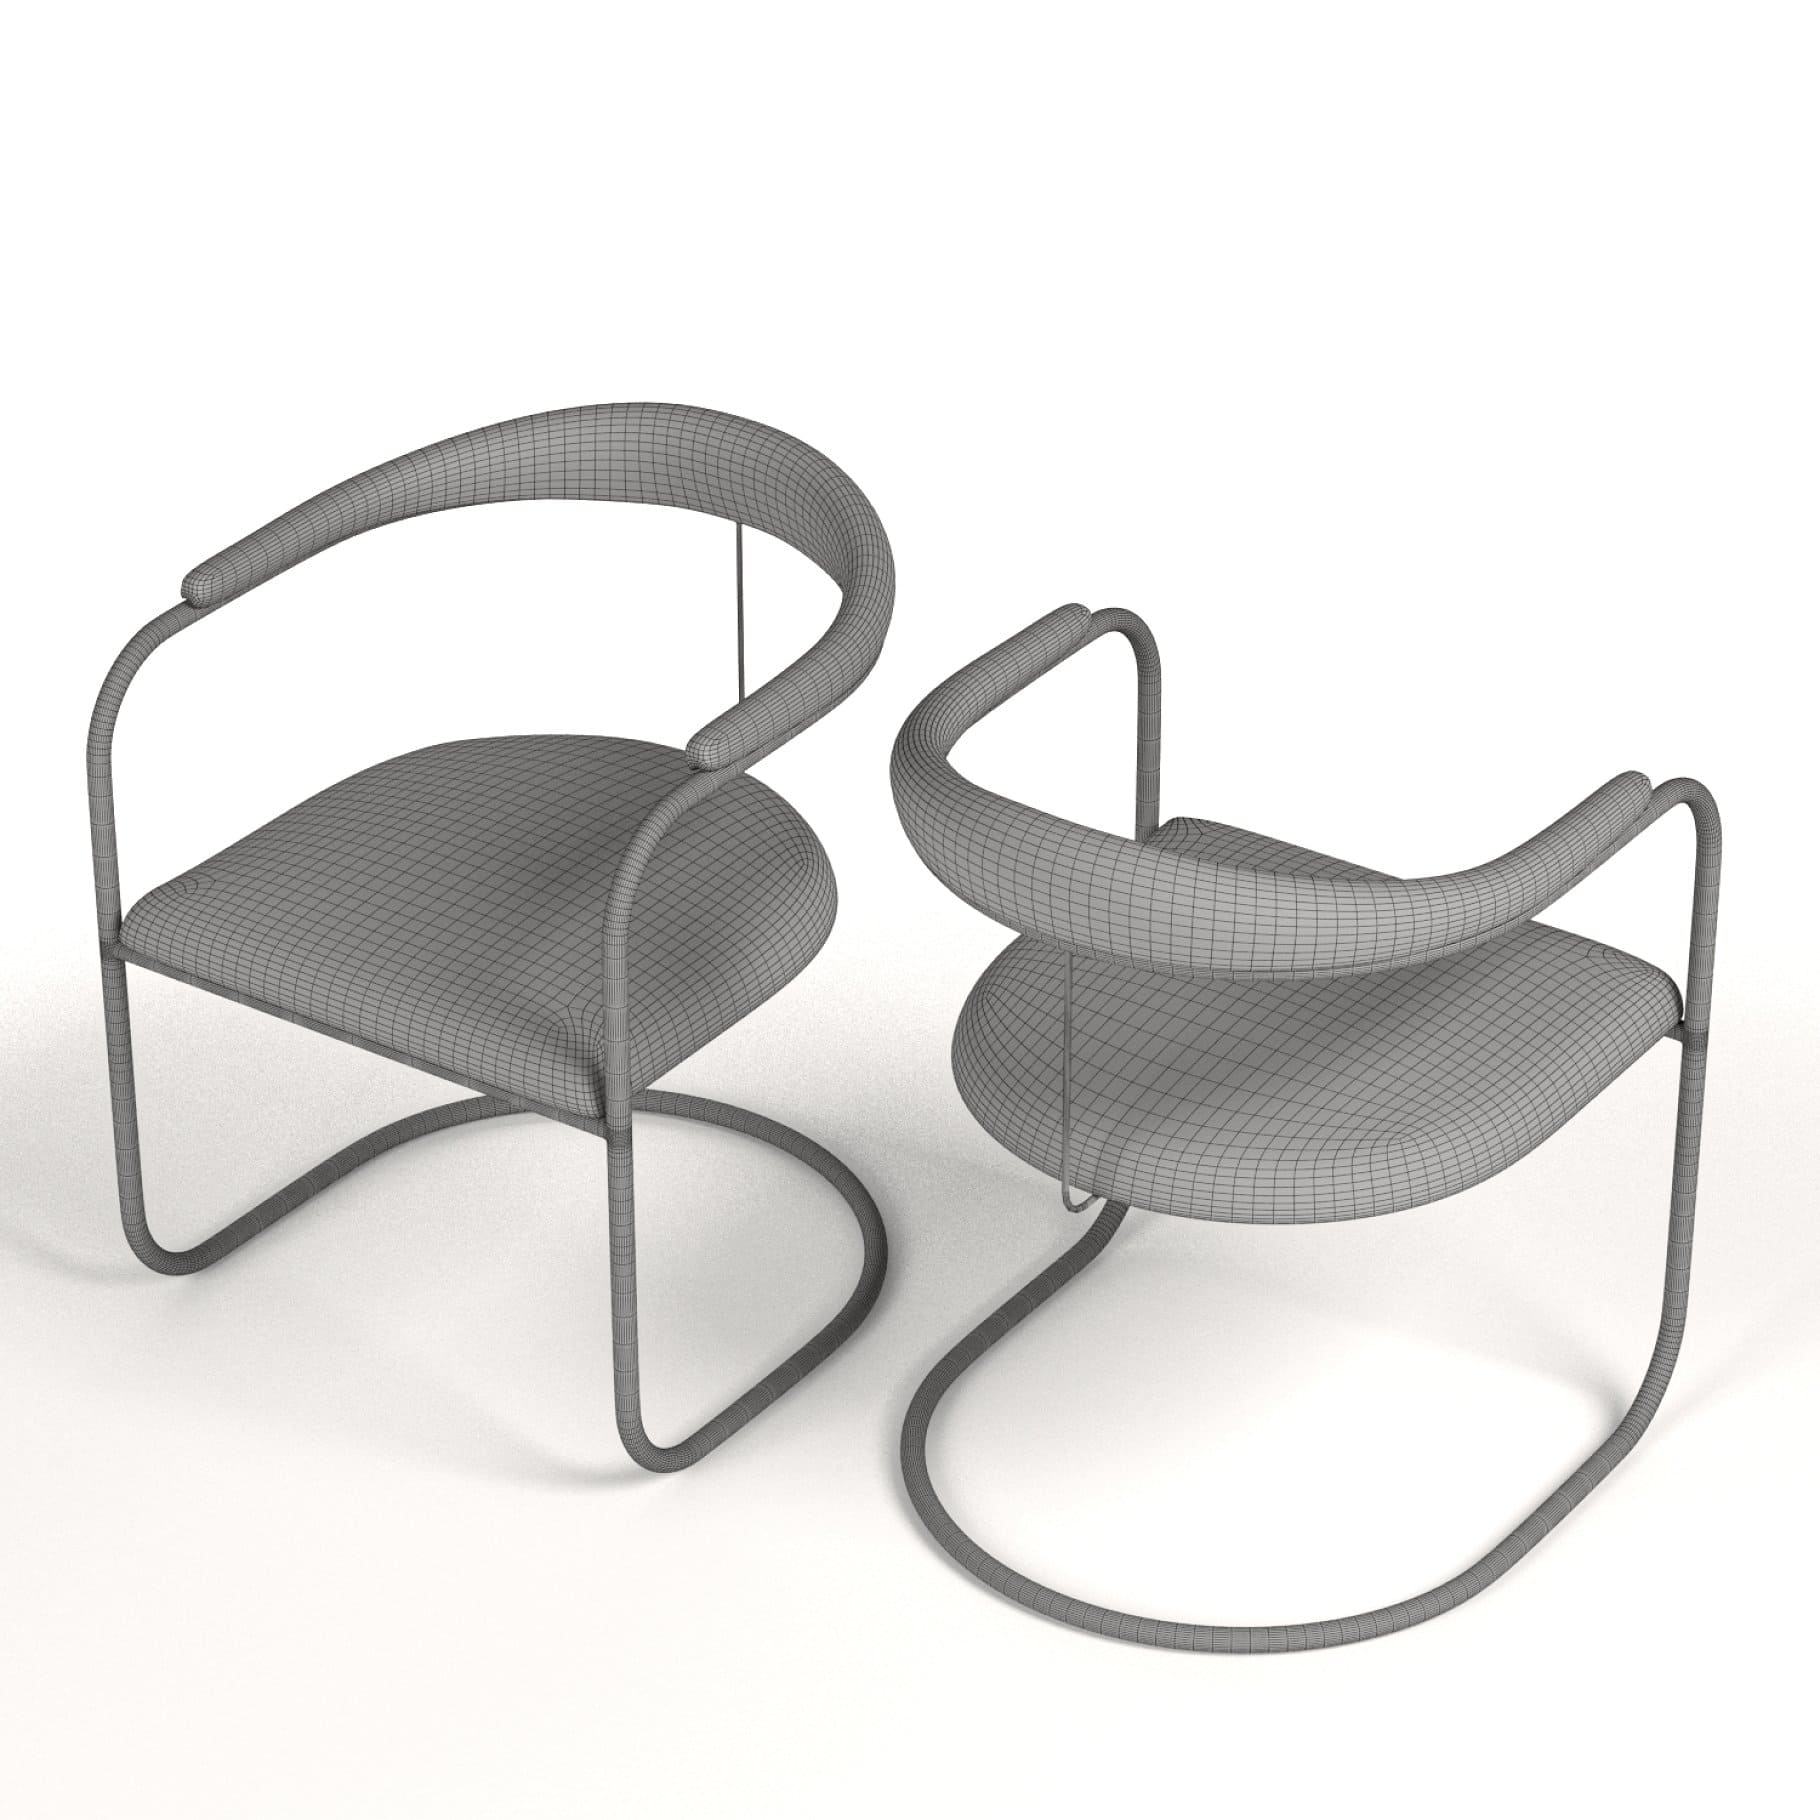 Model of the SS33 Armchair by Anton Lorenz in the graphic editor from two perspectives.